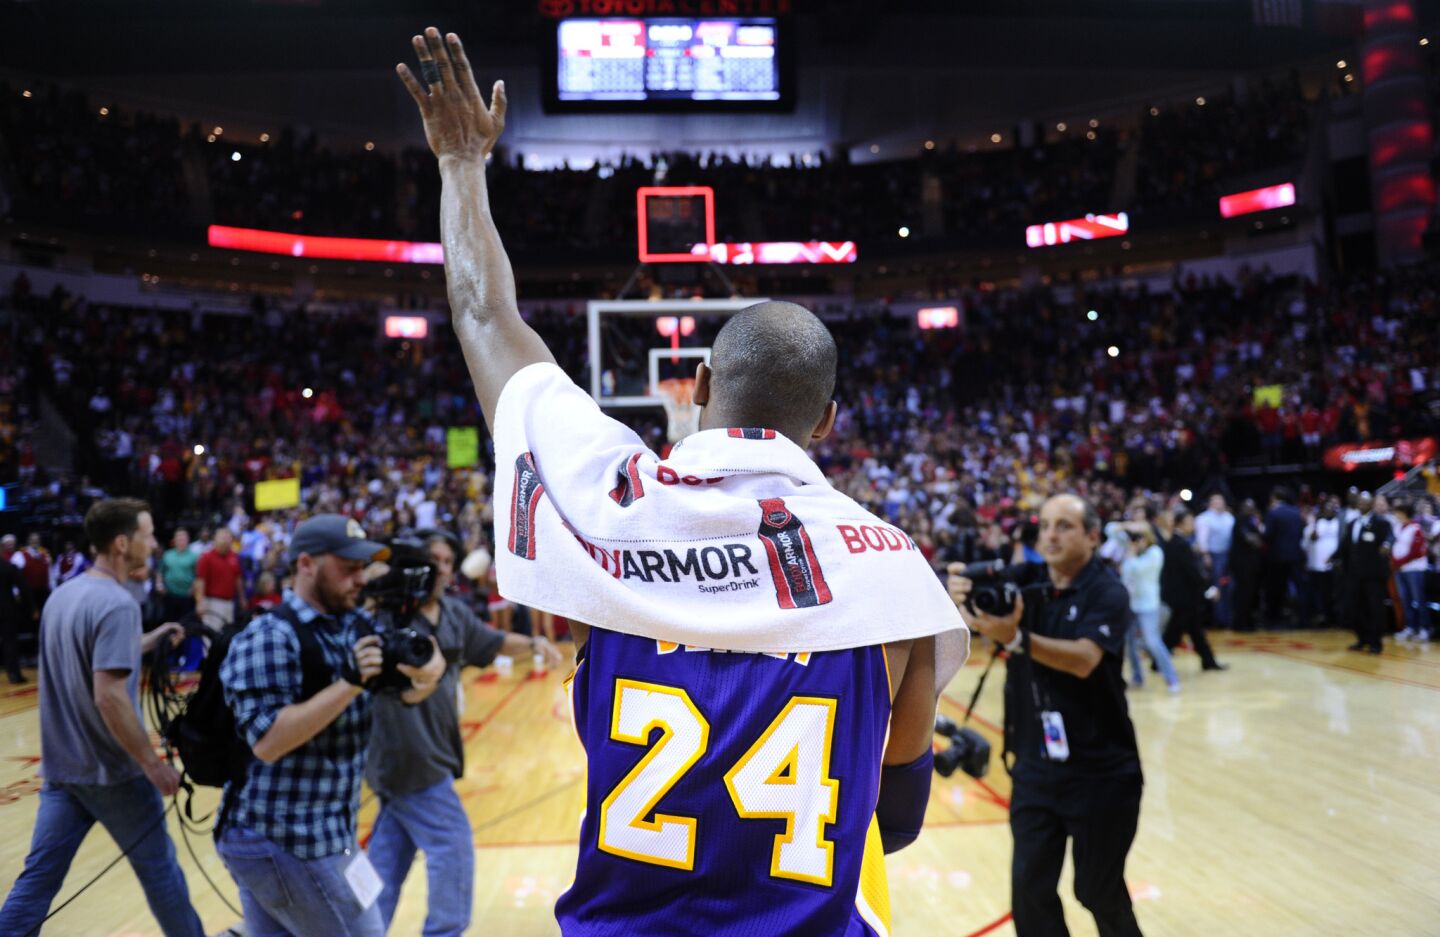 Kobe Bryant waves goodbye to fans after a game against the Rockets in Houston.